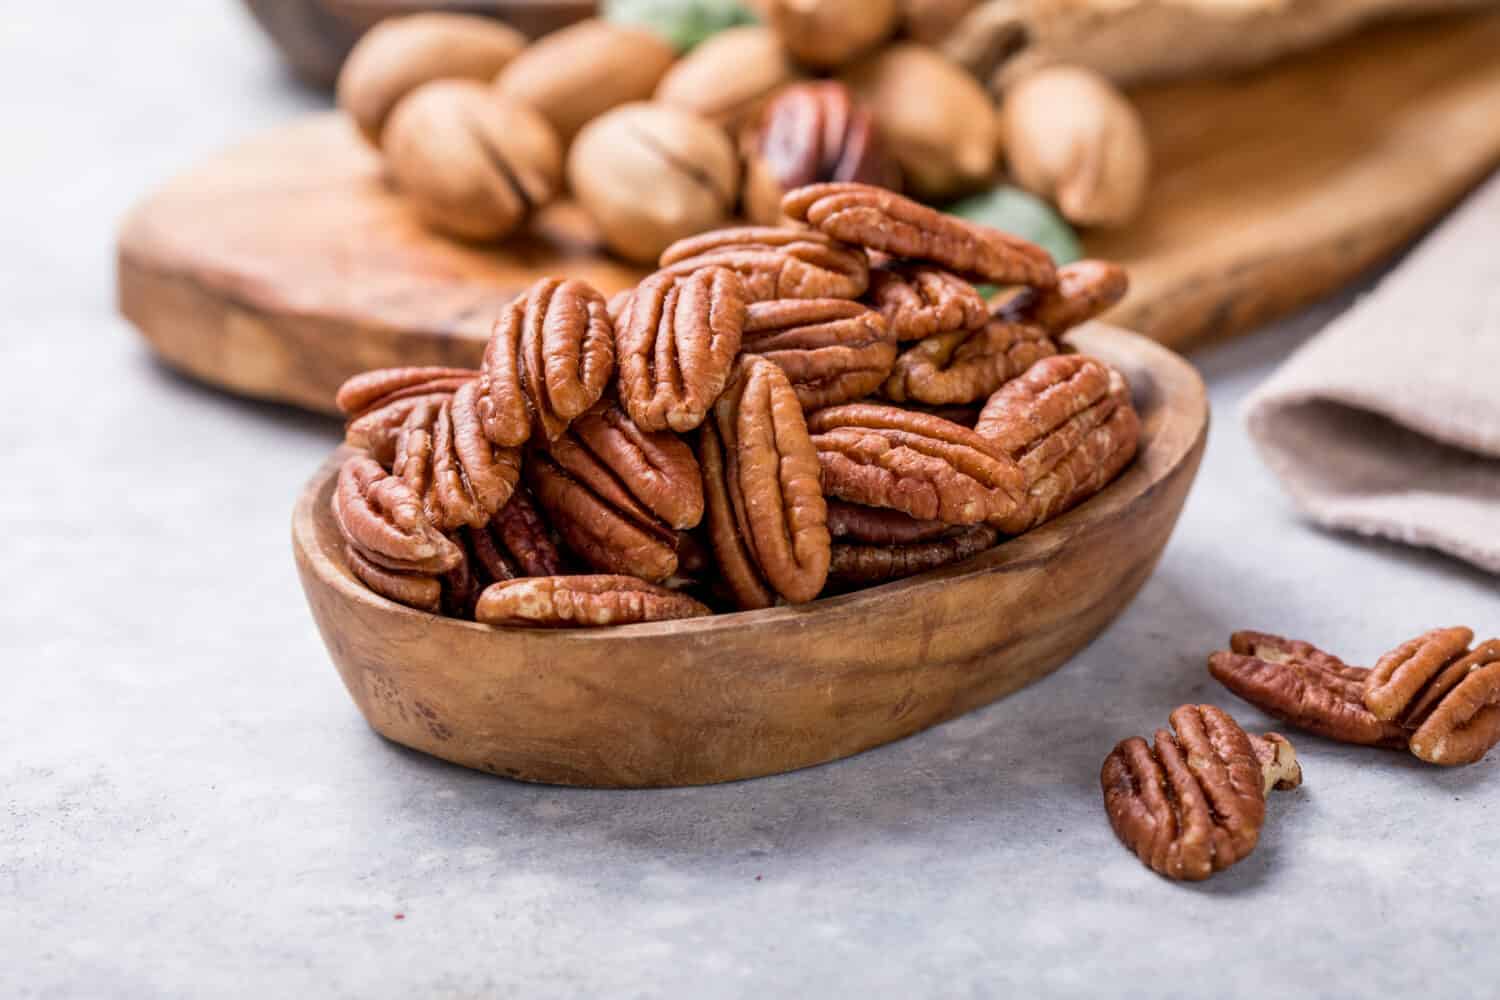 Pecan nut unshelled. Pecans are rich in various trace elements and vitamins